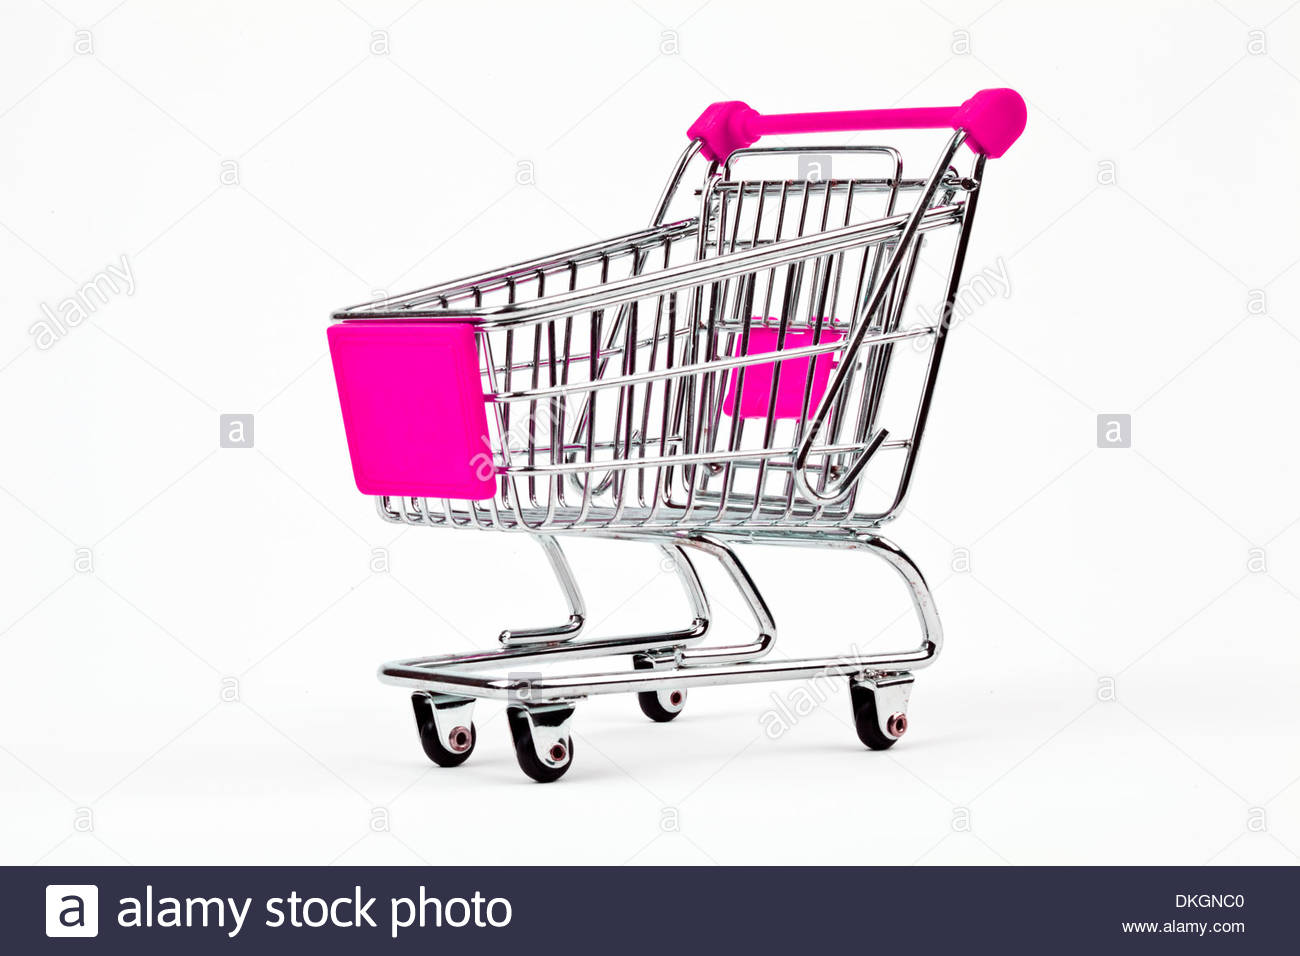 Shopping Trolley Over A Plain White Background Stock Photo